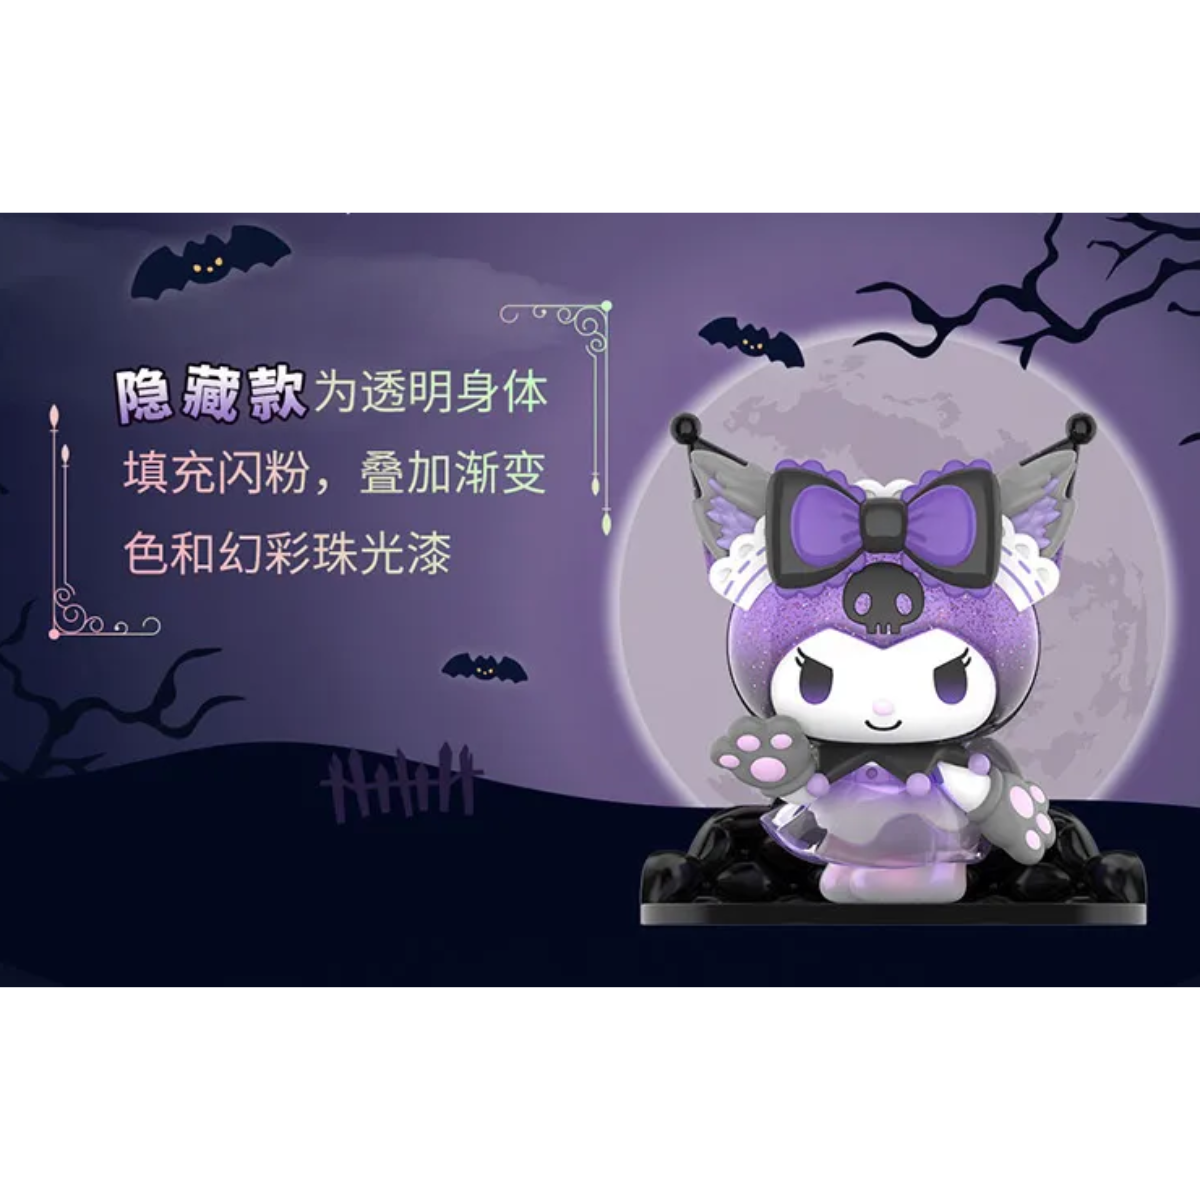 Kuromi Werewolves Of Miller&#39;s Hollow Series-Single Box (Random)-TopToy-Ace Cards &amp; Collectibles